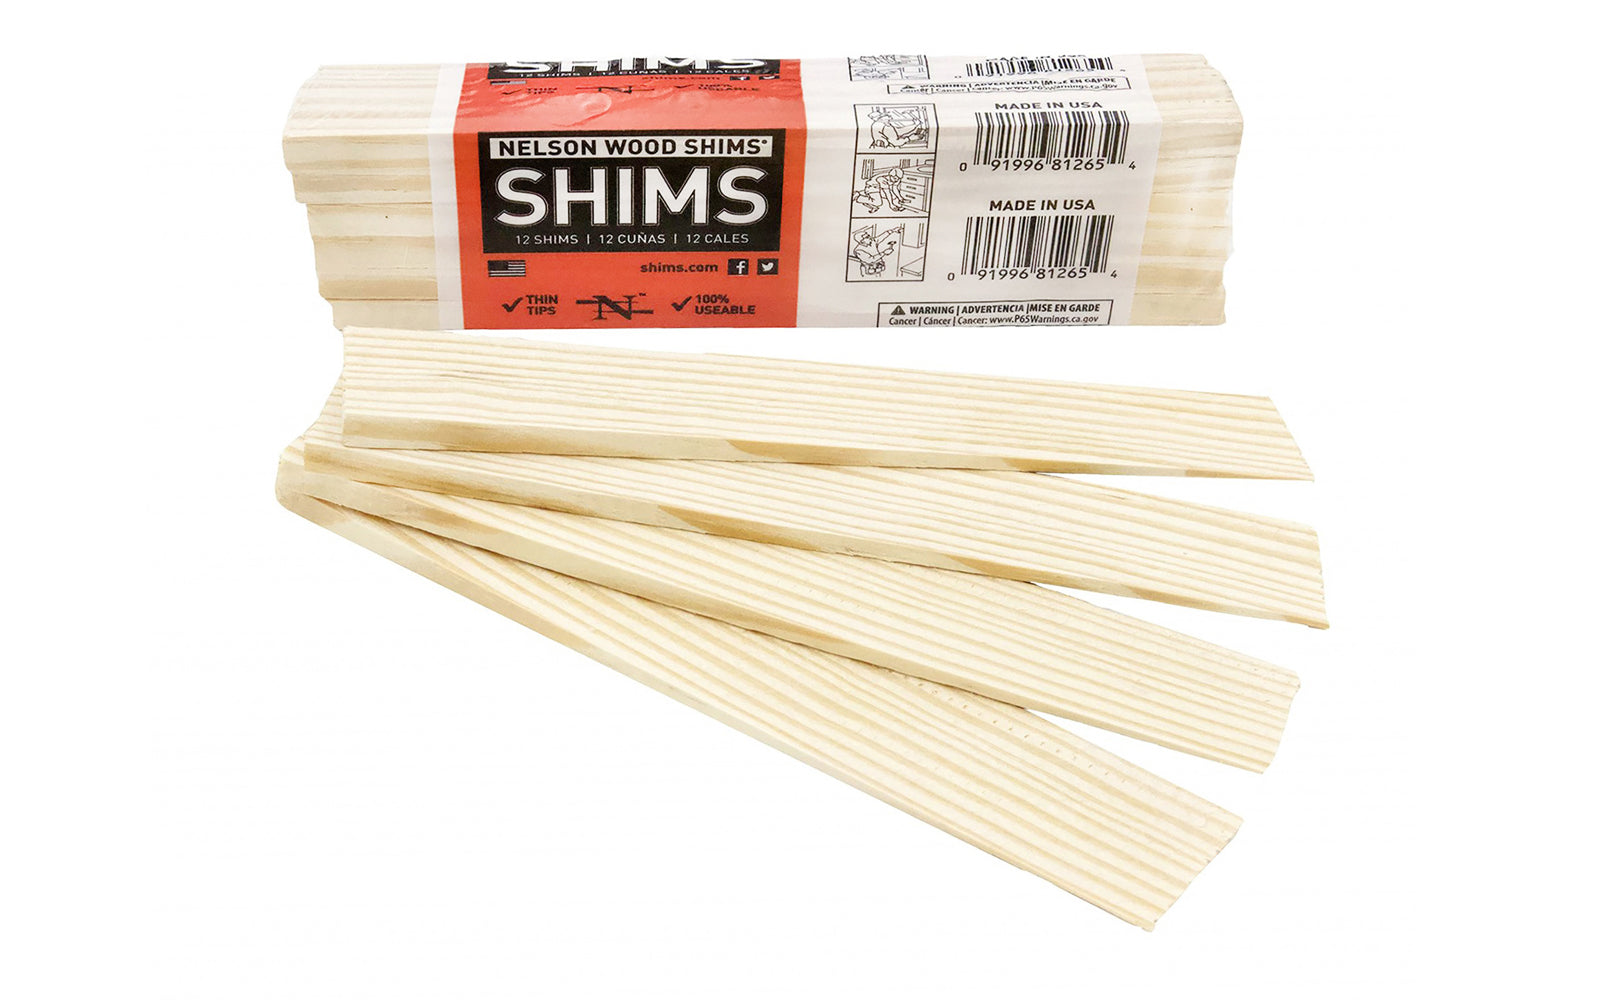 8" long Nelson Wood Shims are a favorite of the do-it-yourself type & contractors. Thin, feathered tips. 8" long x 1-3/8" wide shims in a Excellent for doors, windows, cabinets, countertops, etc. 12 pack bundle. DIY Wood Shim Bundle. 100% kiln dried. Made in USA.